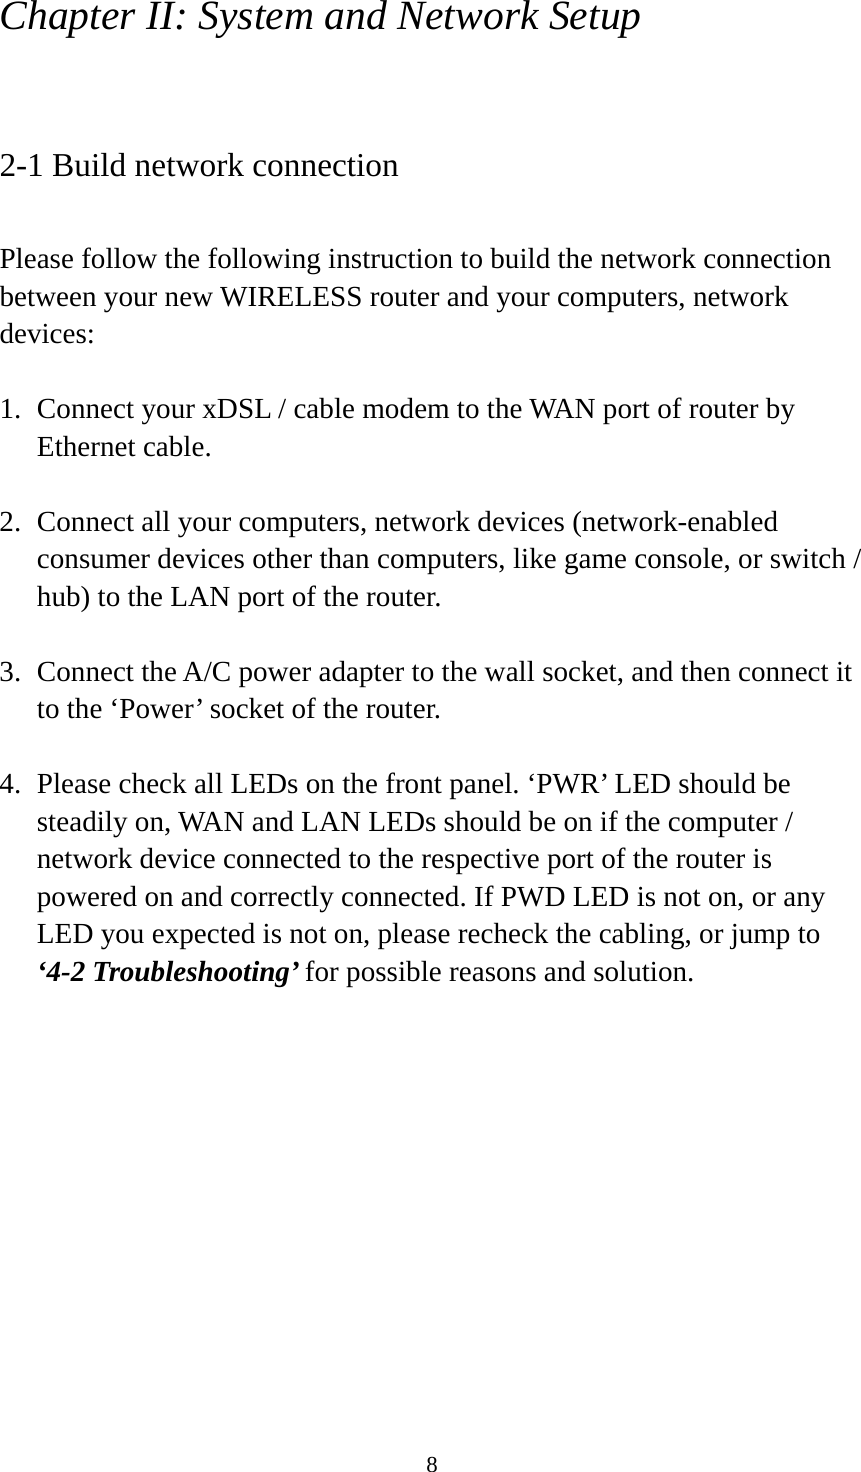 8 Chapter II: System and Network Setup  2-1 Build network connection  Please follow the following instruction to build the network connection between your new WIRELESS router and your computers, network devices:  1. Connect your xDSL / cable modem to the WAN port of router by Ethernet cable.    2. Connect all your computers, network devices (network-enabled consumer devices other than computers, like game console, or switch / hub) to the LAN port of the router.  3. Connect the A/C power adapter to the wall socket, and then connect it to the ‘Power’ socket of the router.  4. Please check all LEDs on the front panel. ‘PWR’ LED should be steadily on, WAN and LAN LEDs should be on if the computer / network device connected to the respective port of the router is powered on and correctly connected. If PWD LED is not on, or any LED you expected is not on, please recheck the cabling, or jump to ‘4-2 Troubleshooting’ for possible reasons and solution. 